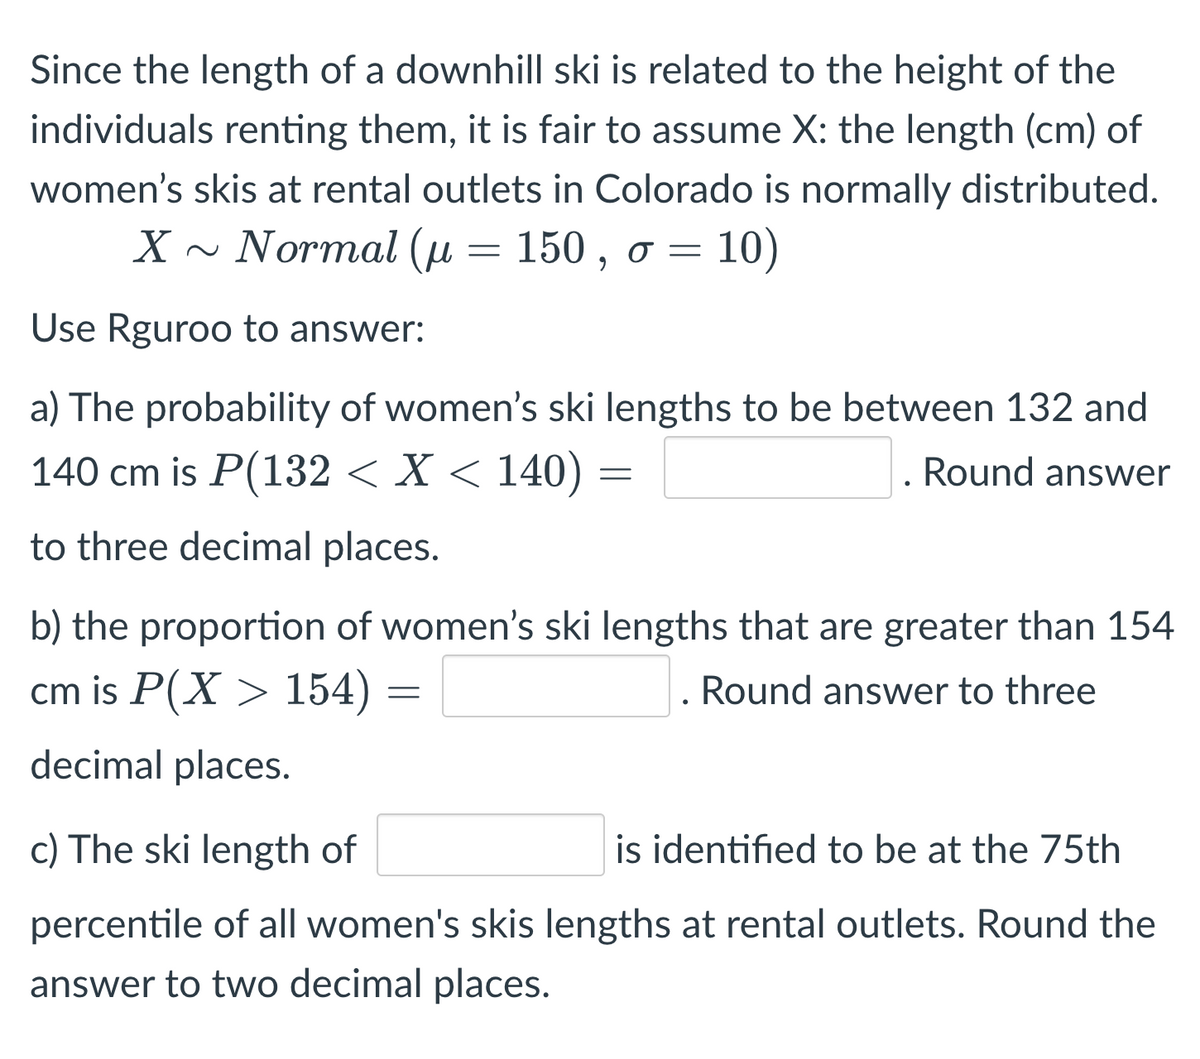 Since the length of a downhill ski is related to the height of the
individuals renting them, it is fair to assume X: the length (cm) of
women's skis at rental outlets in Colorado is normally distributed.
X ~ Normal (u 150, o = 10)
=
Use Rguroo to answer:
a) The probability of women's ski lengths to be between 132 and
140 cm is P(132 < X < 140) =
Round answer
to three decimal places.
b) the proportion of women's ski lengths that are greater than 154
cm is P(X> 154) =
. Round answer to three
decimal places.
c) The ski length of
is identified to be at the 75th
percentile of all women's skis lengths at rental outlets. Round the
answer to two decimal places.